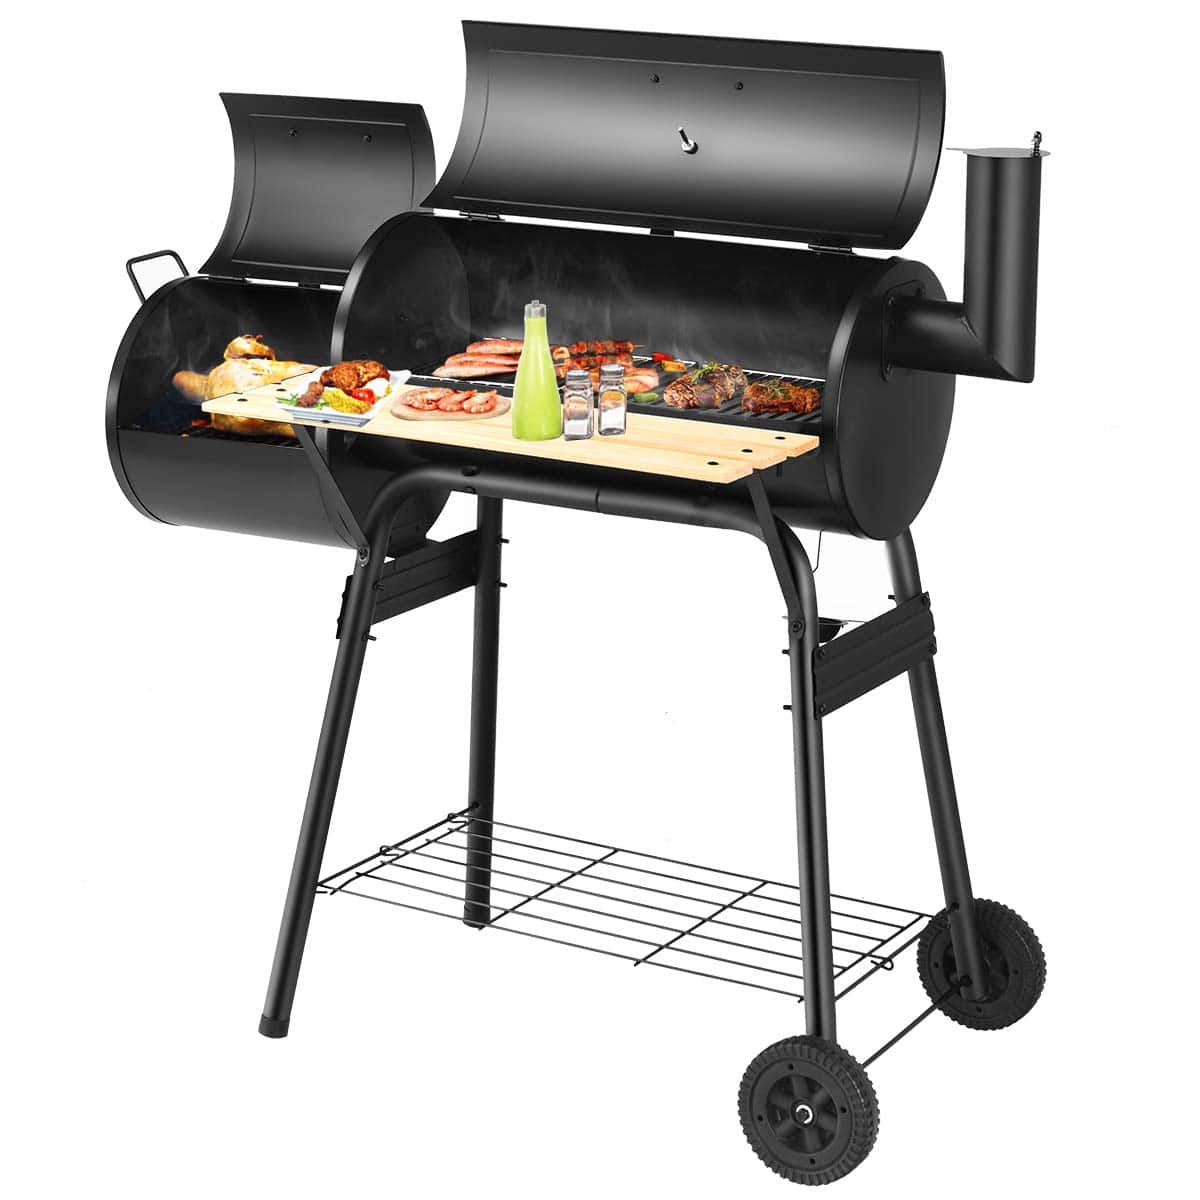 Giantex Charcoal Barbecue Grill 